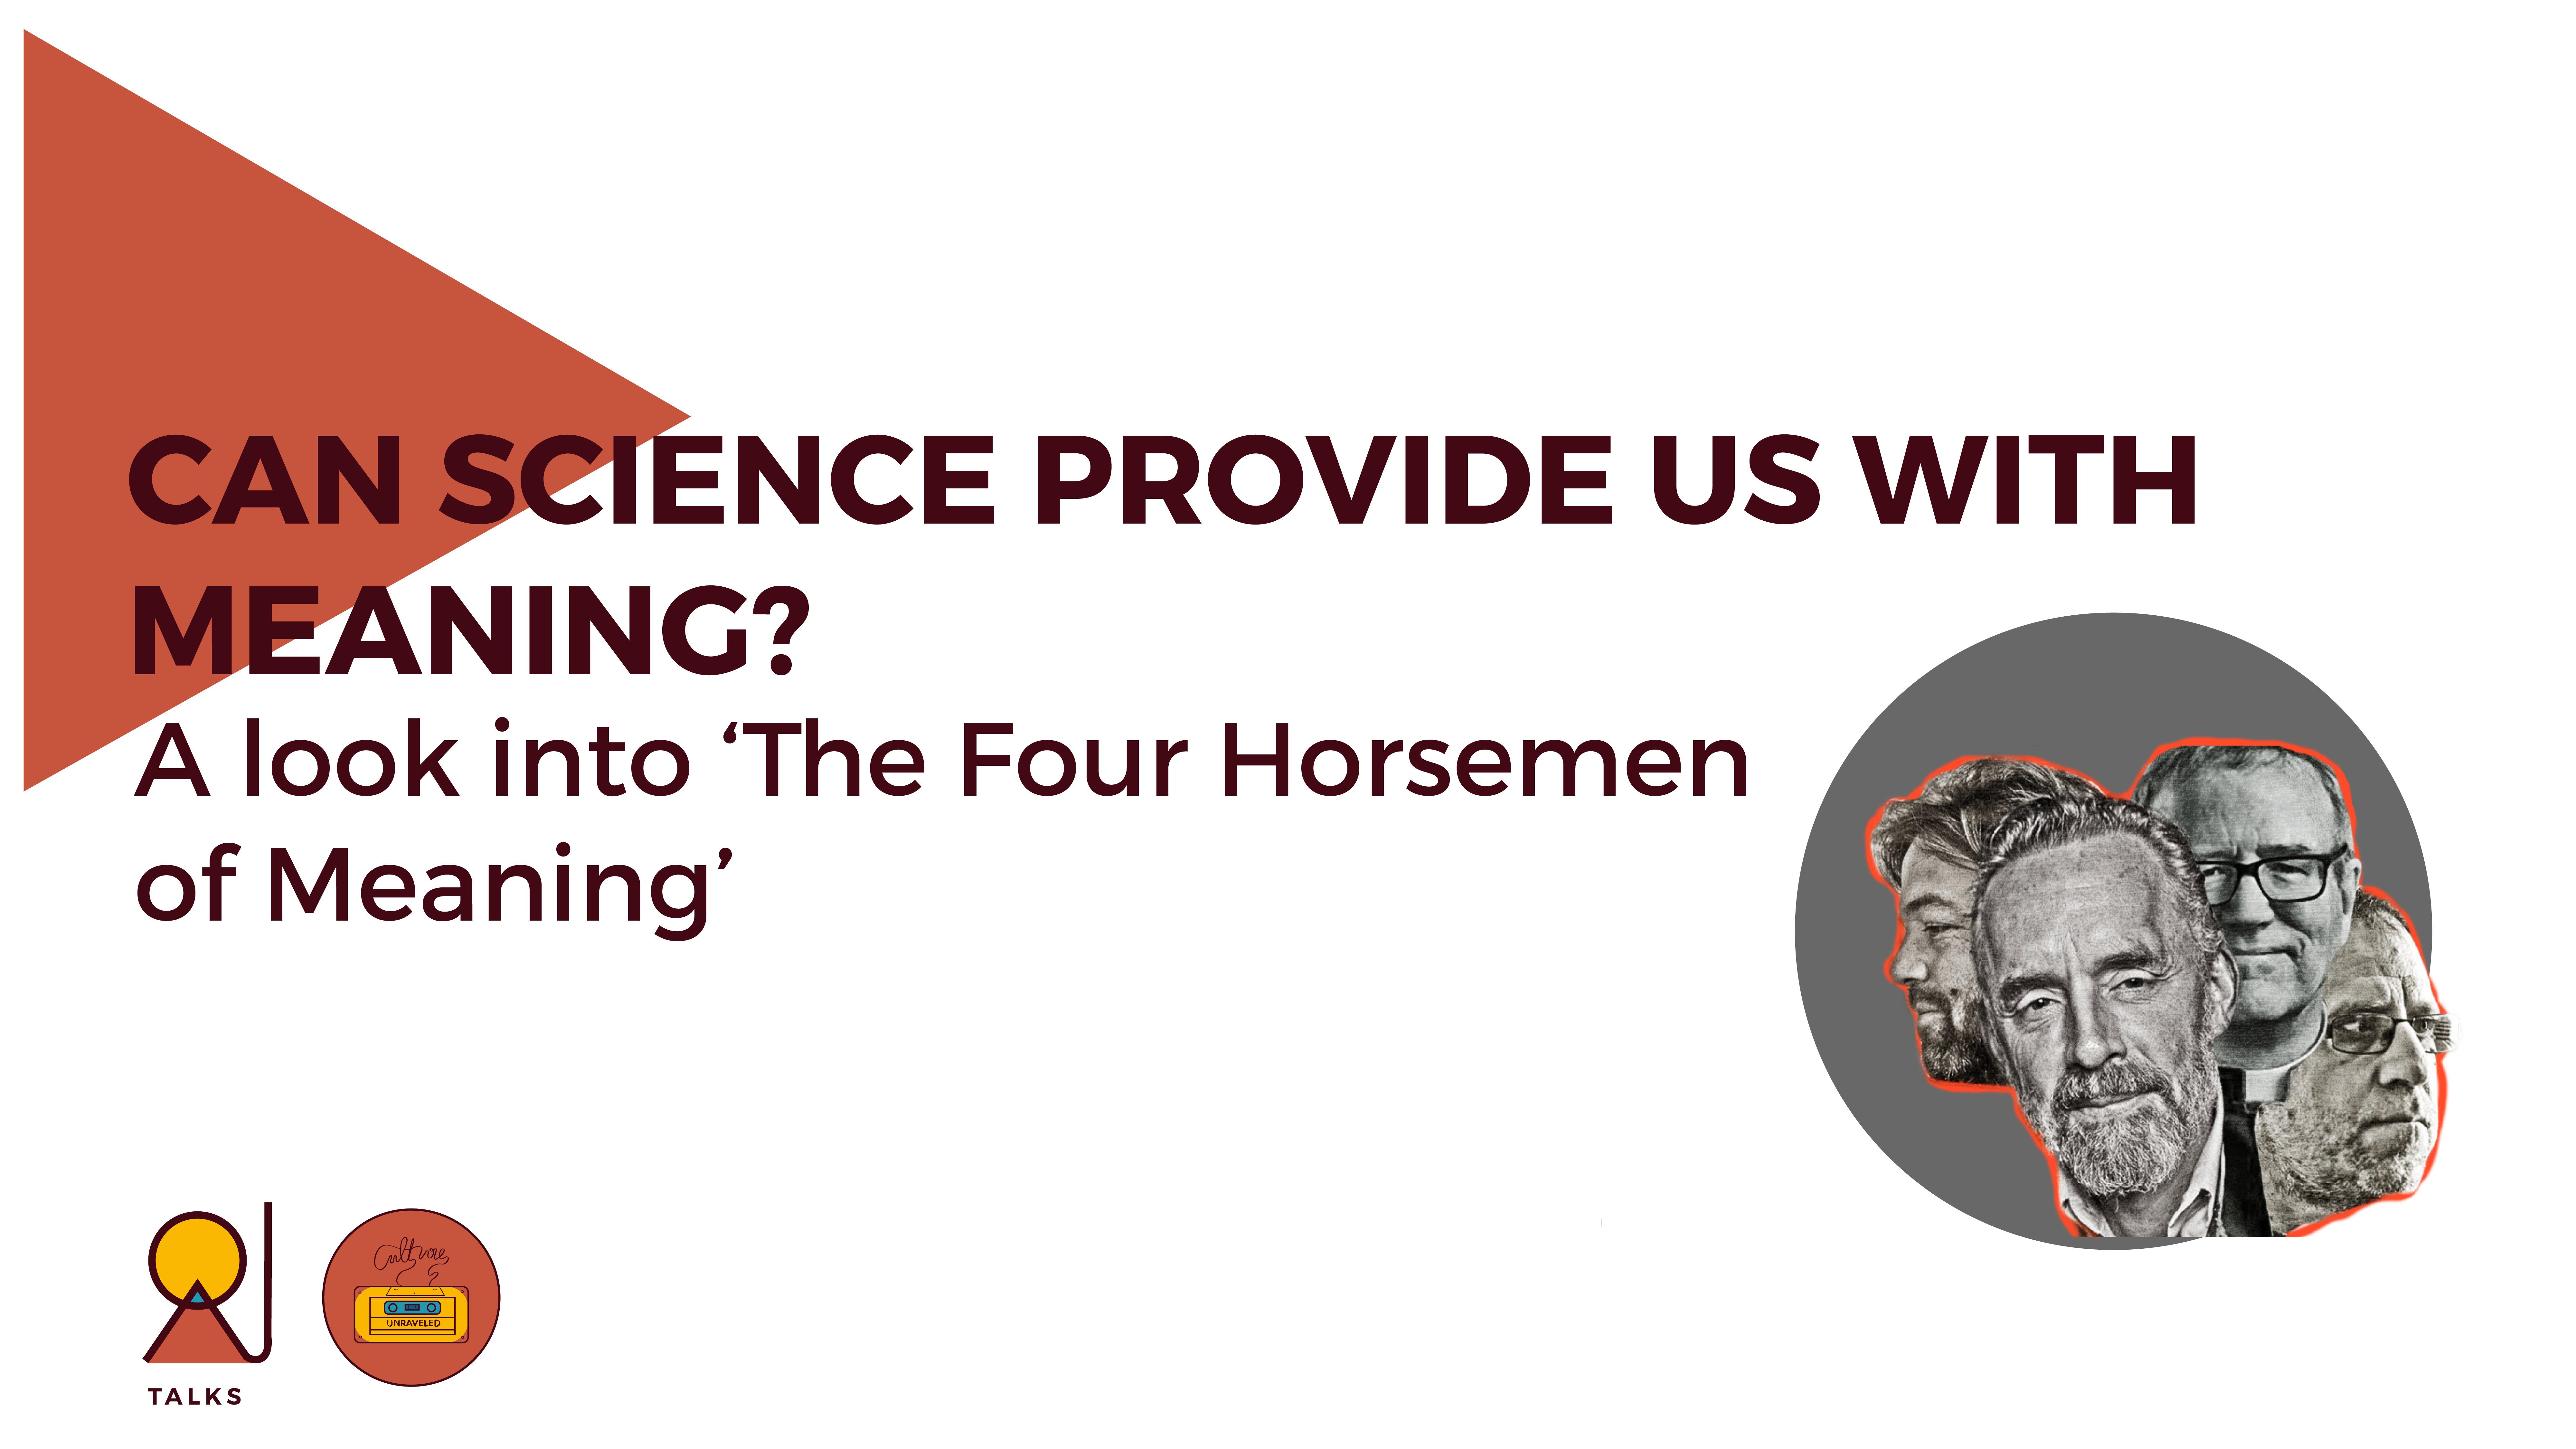 Can Science Provide us with Meaning? A Look into ‘The Four Horsemen of Meaning’